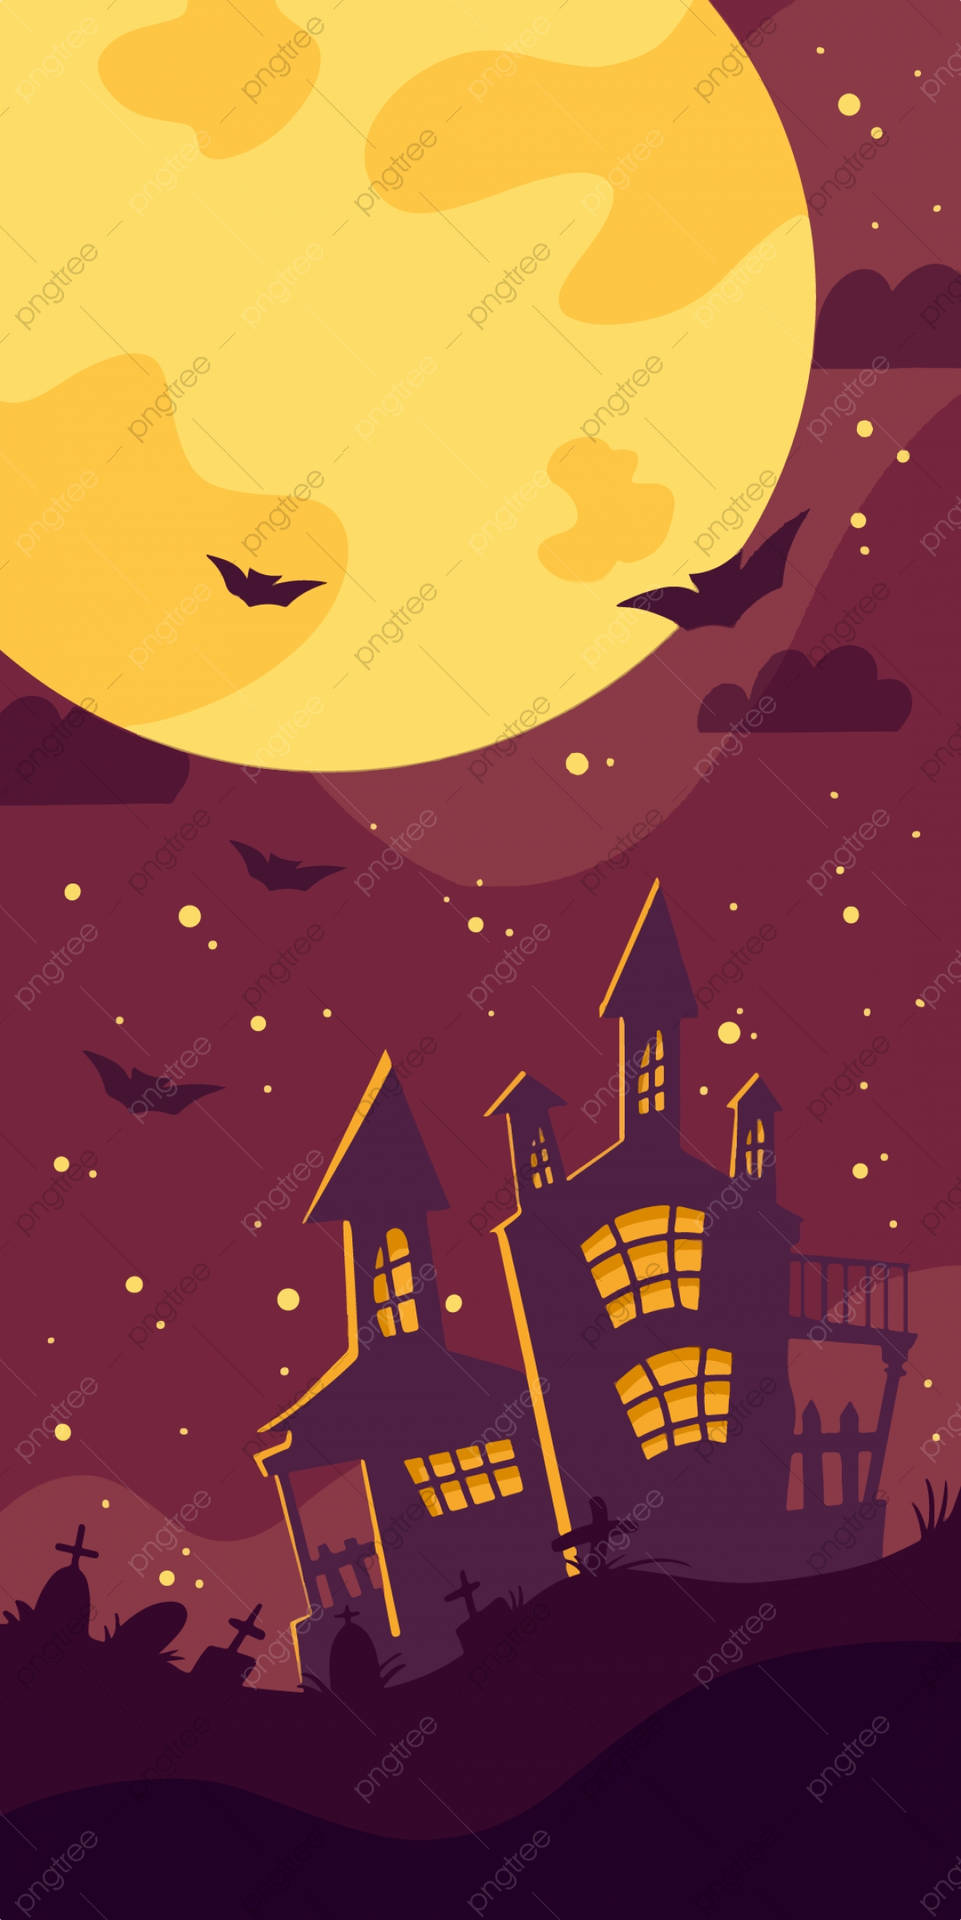 Spooky Old Haunted House Halloween Phone Wallpaper